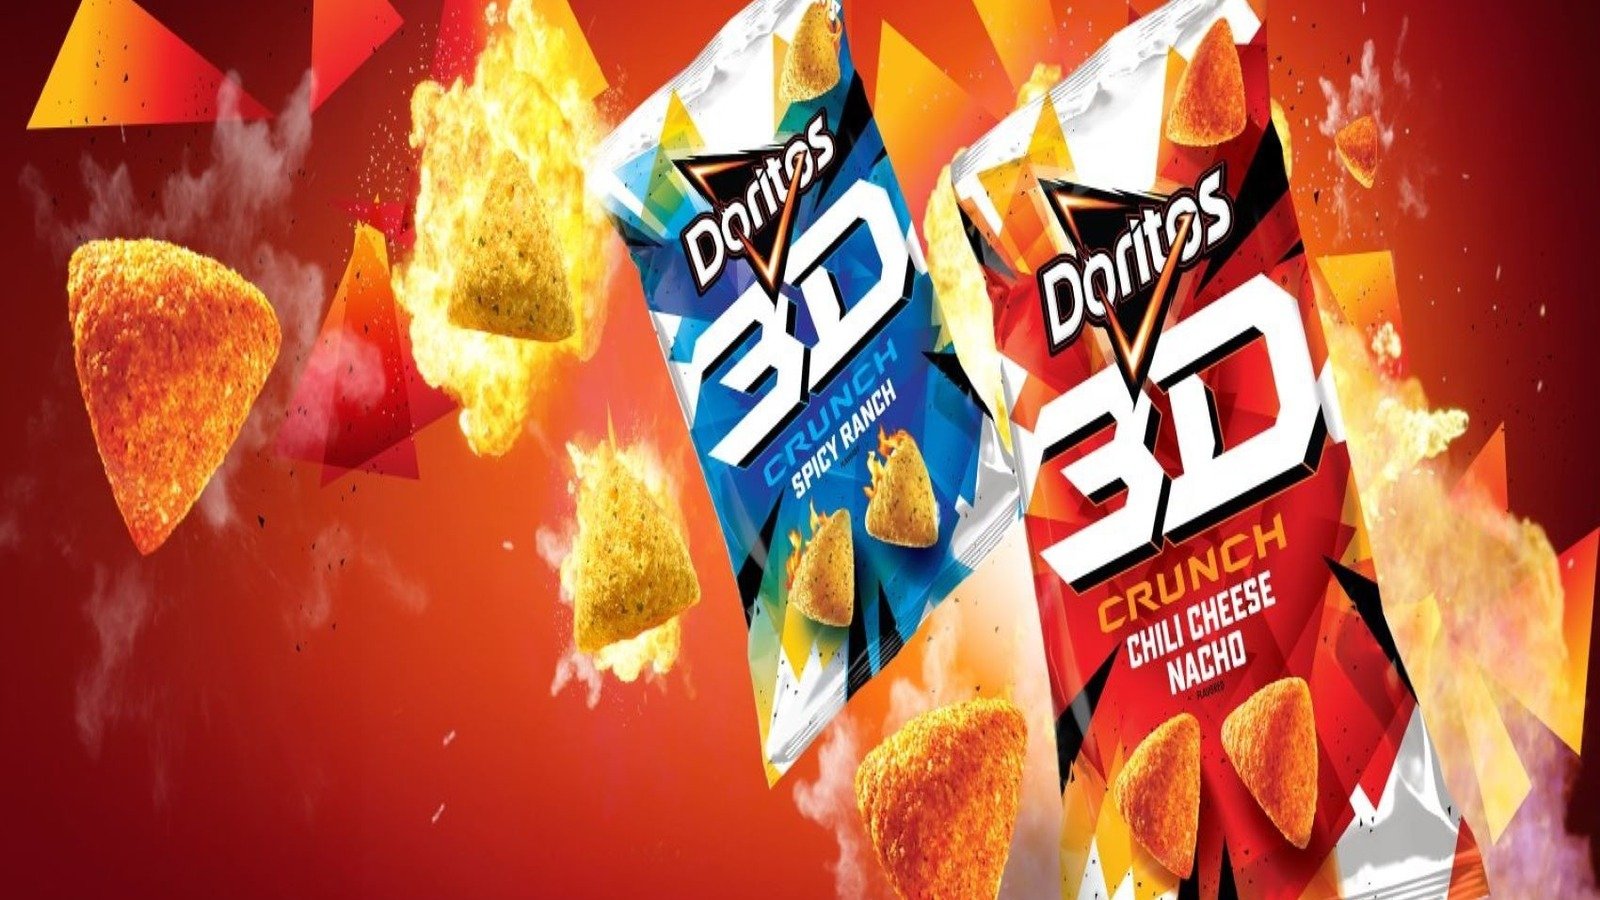 Here's Where You Know That Doritos 3D Super Bowl Commercial Song From - Mashed